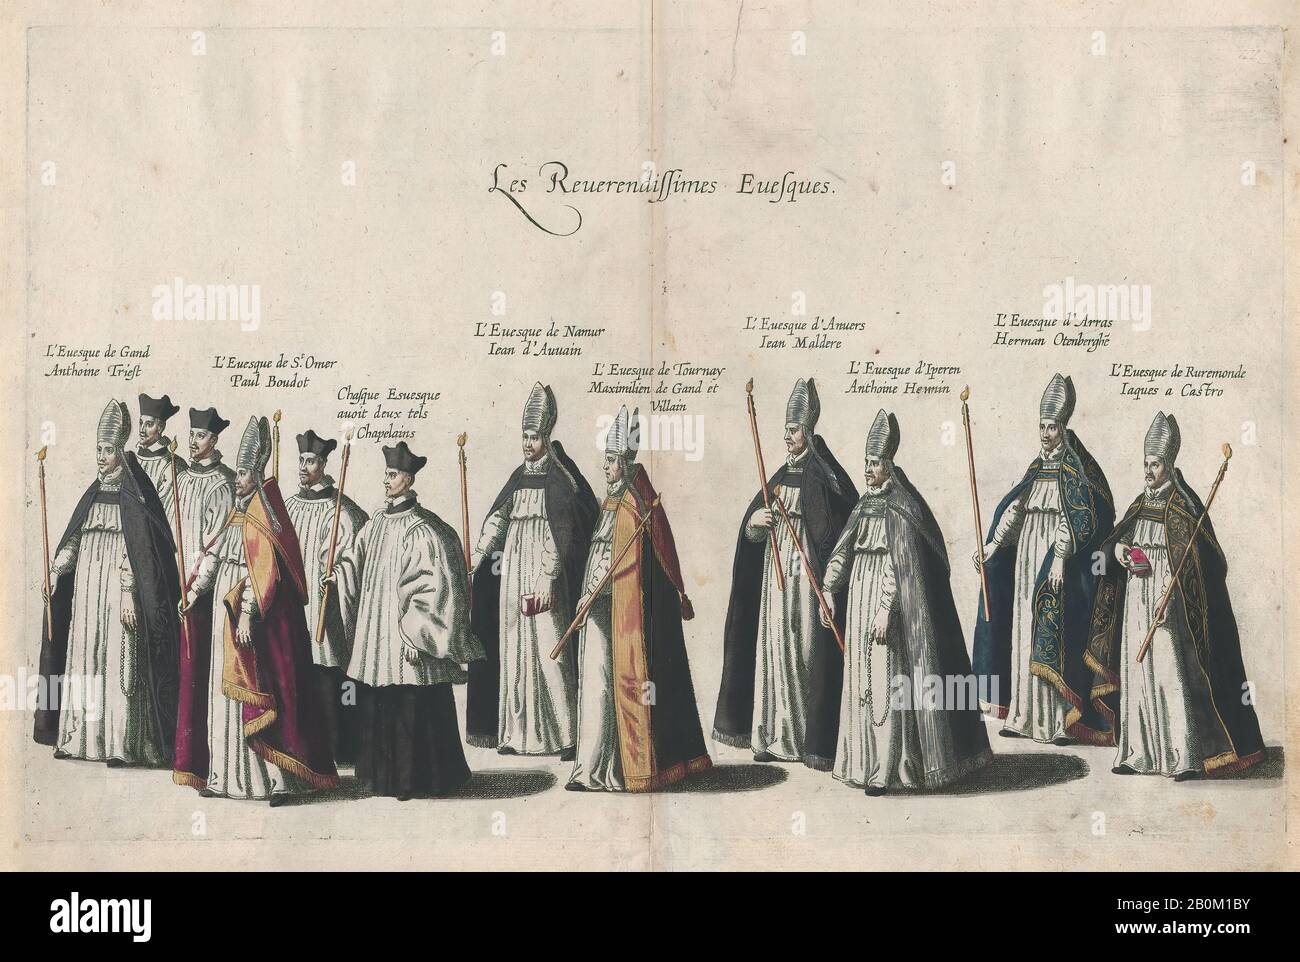 Cornelis Galle I, Plate 12: Members of the clergy marching in the funeral procession of Archduke Albert of Austria; from 'Pompa Funebris, Alberti Pii', Cornelis Galle I (Netherlandish, Antwerp 1576–1650 Antwerp), After Jacques Francquart (French, Brussels 1577–1651 Brussels), 1623, Etching with hand coloring, Sheet: 11 3/16 × 15 1/4 in. (28.4 × 38.8 cm), Plate: 10 3/16 × 14 9/16 in. (25.8 × 37 cm Stock Photo